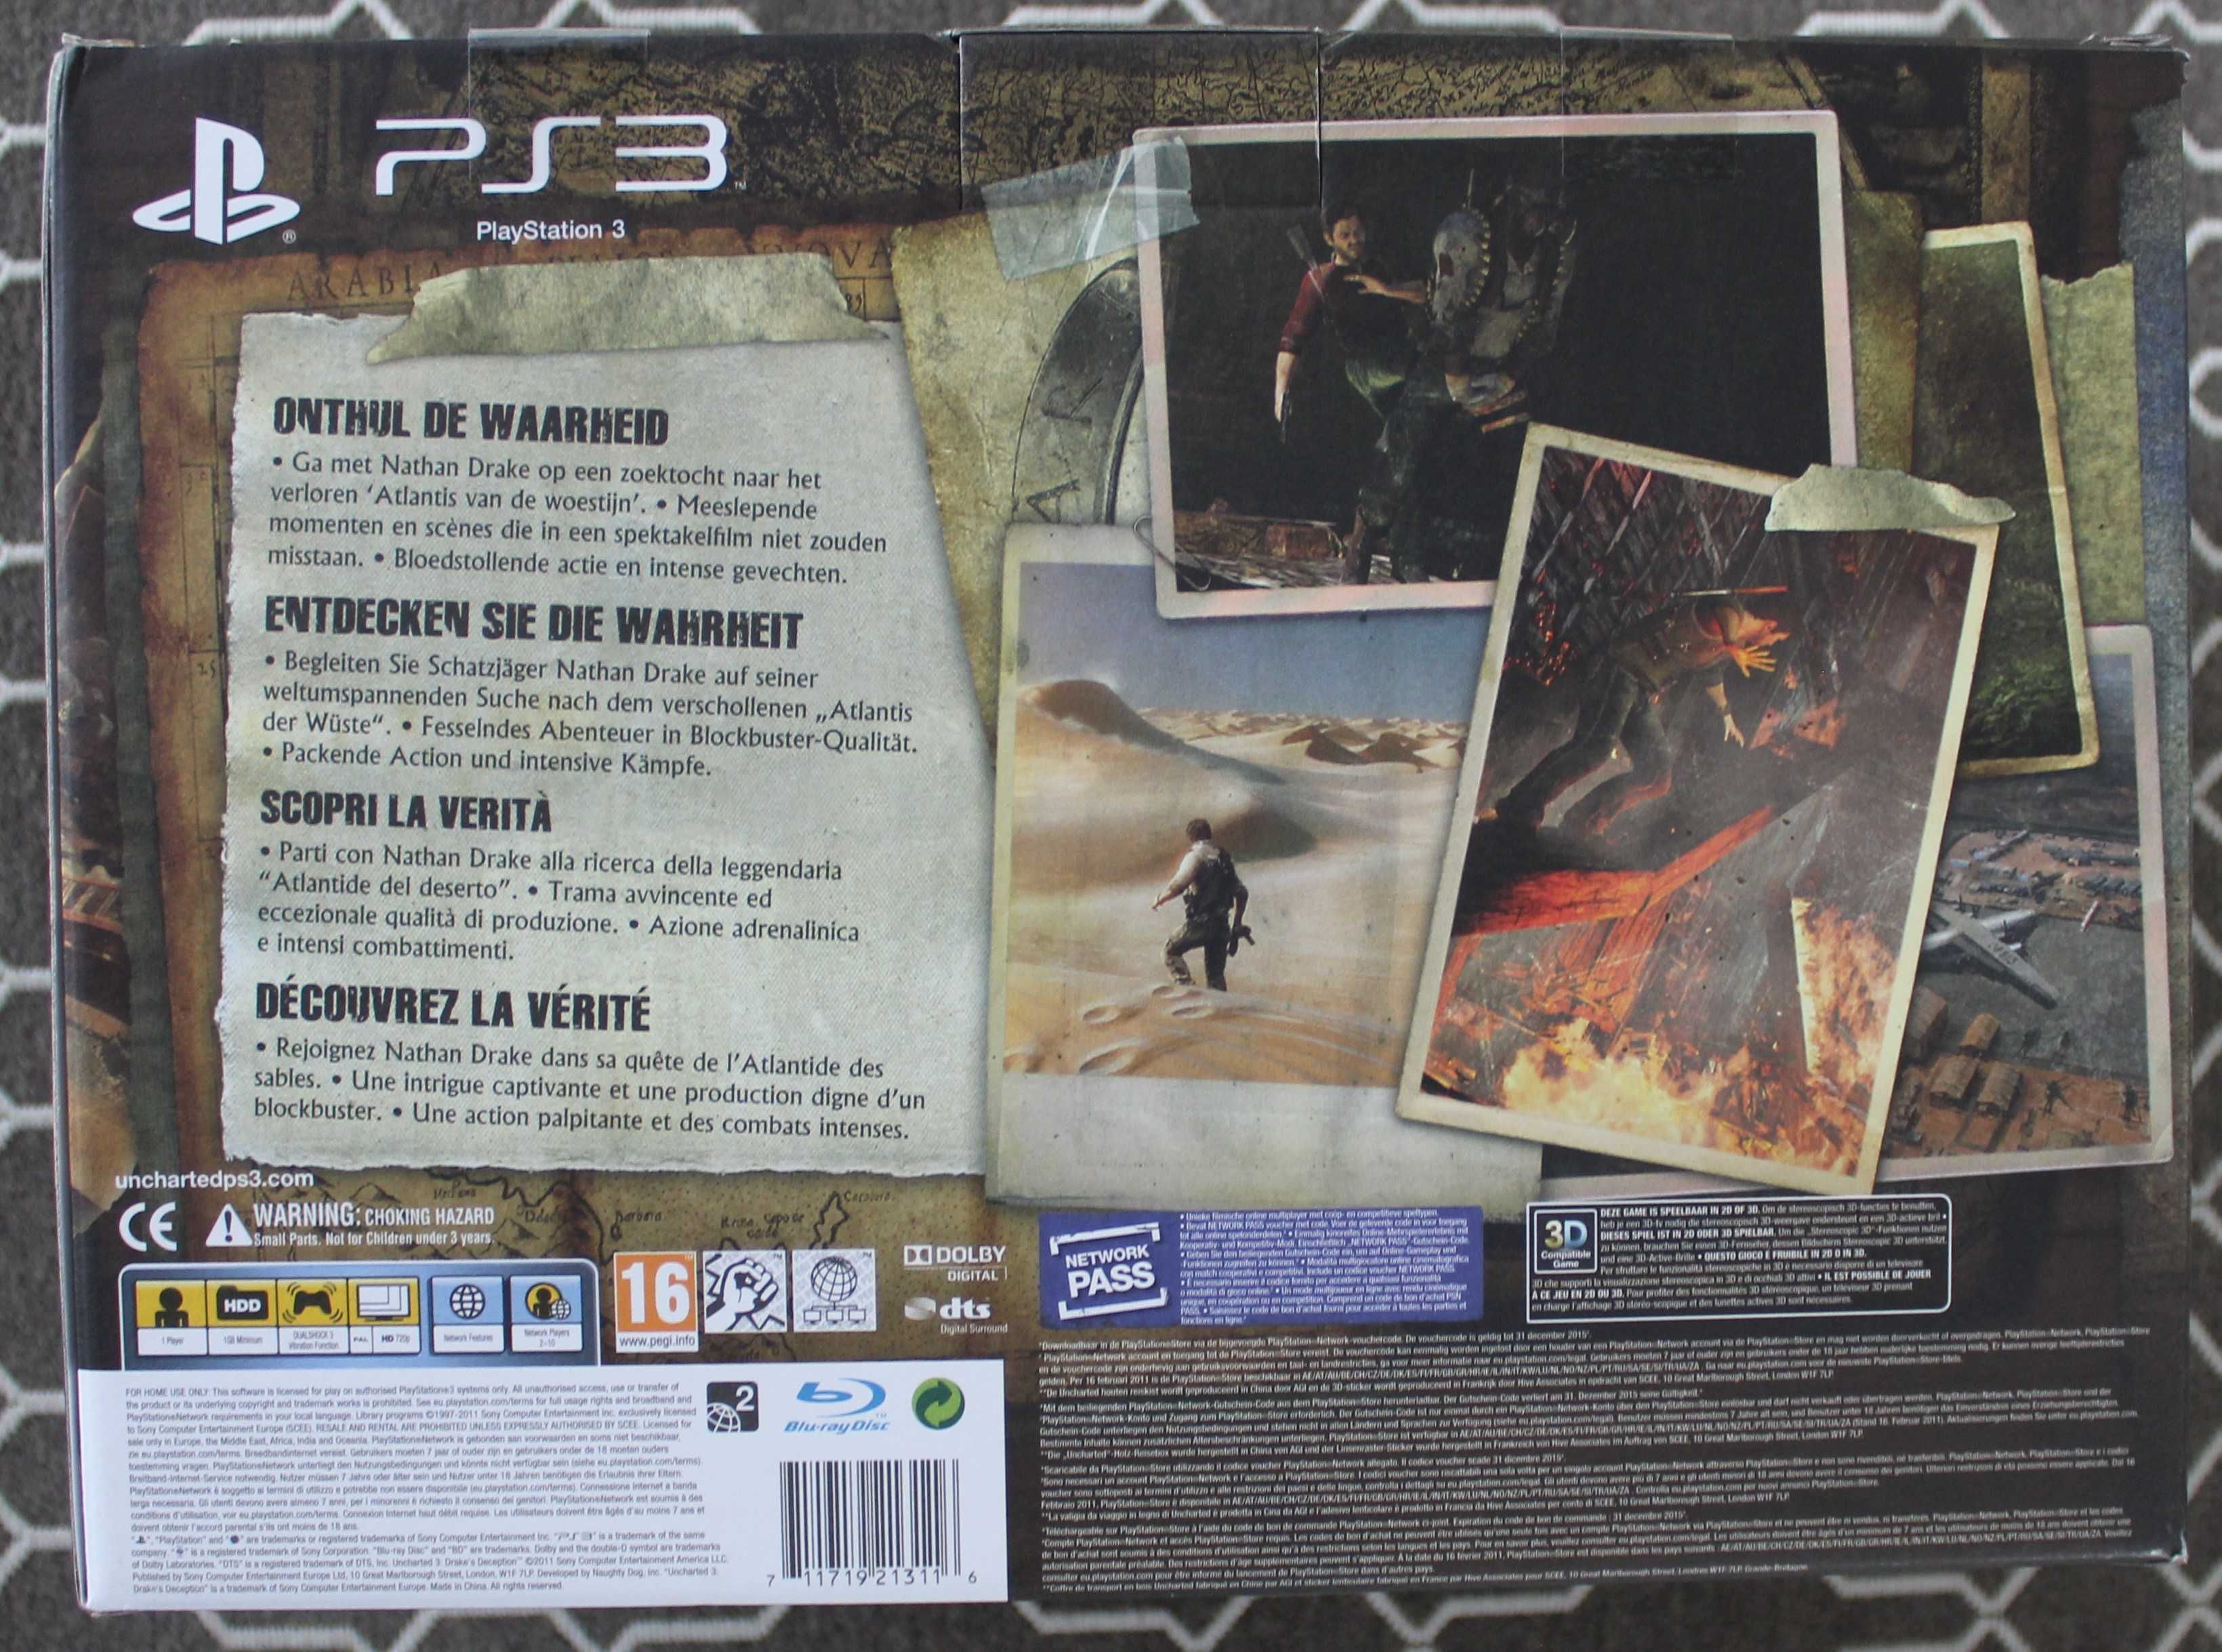 Uncharted 3 Drake's Deception PS3 Explorer Edition / Edycja Odkrywca